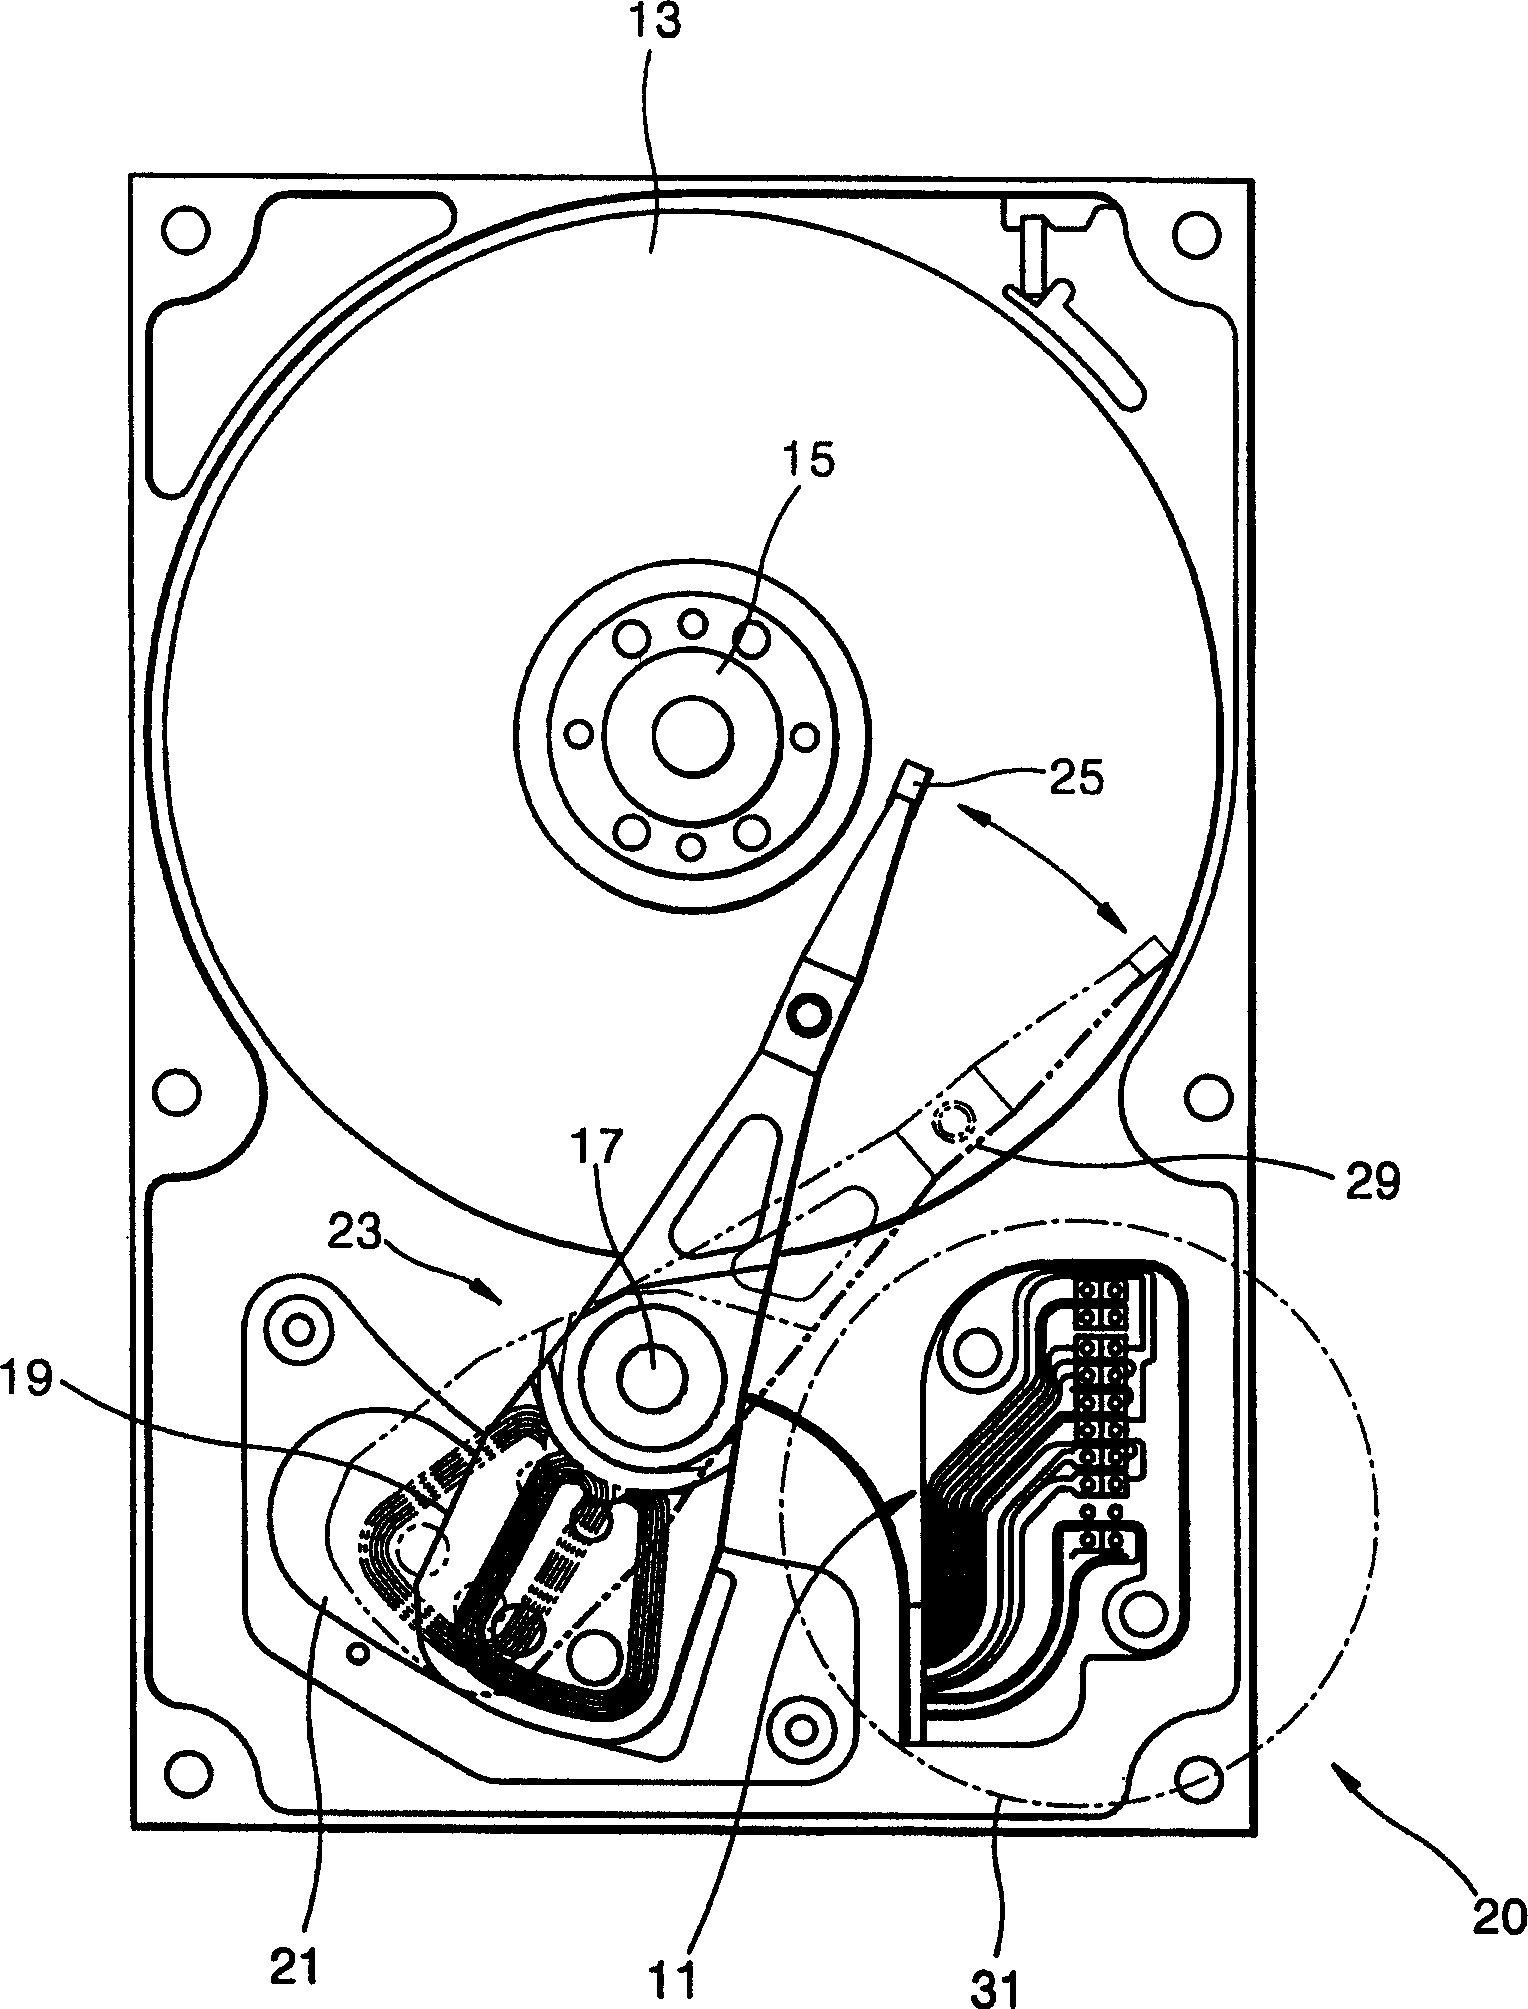 Fixed disk drive including flexible printed circuit board with damping material